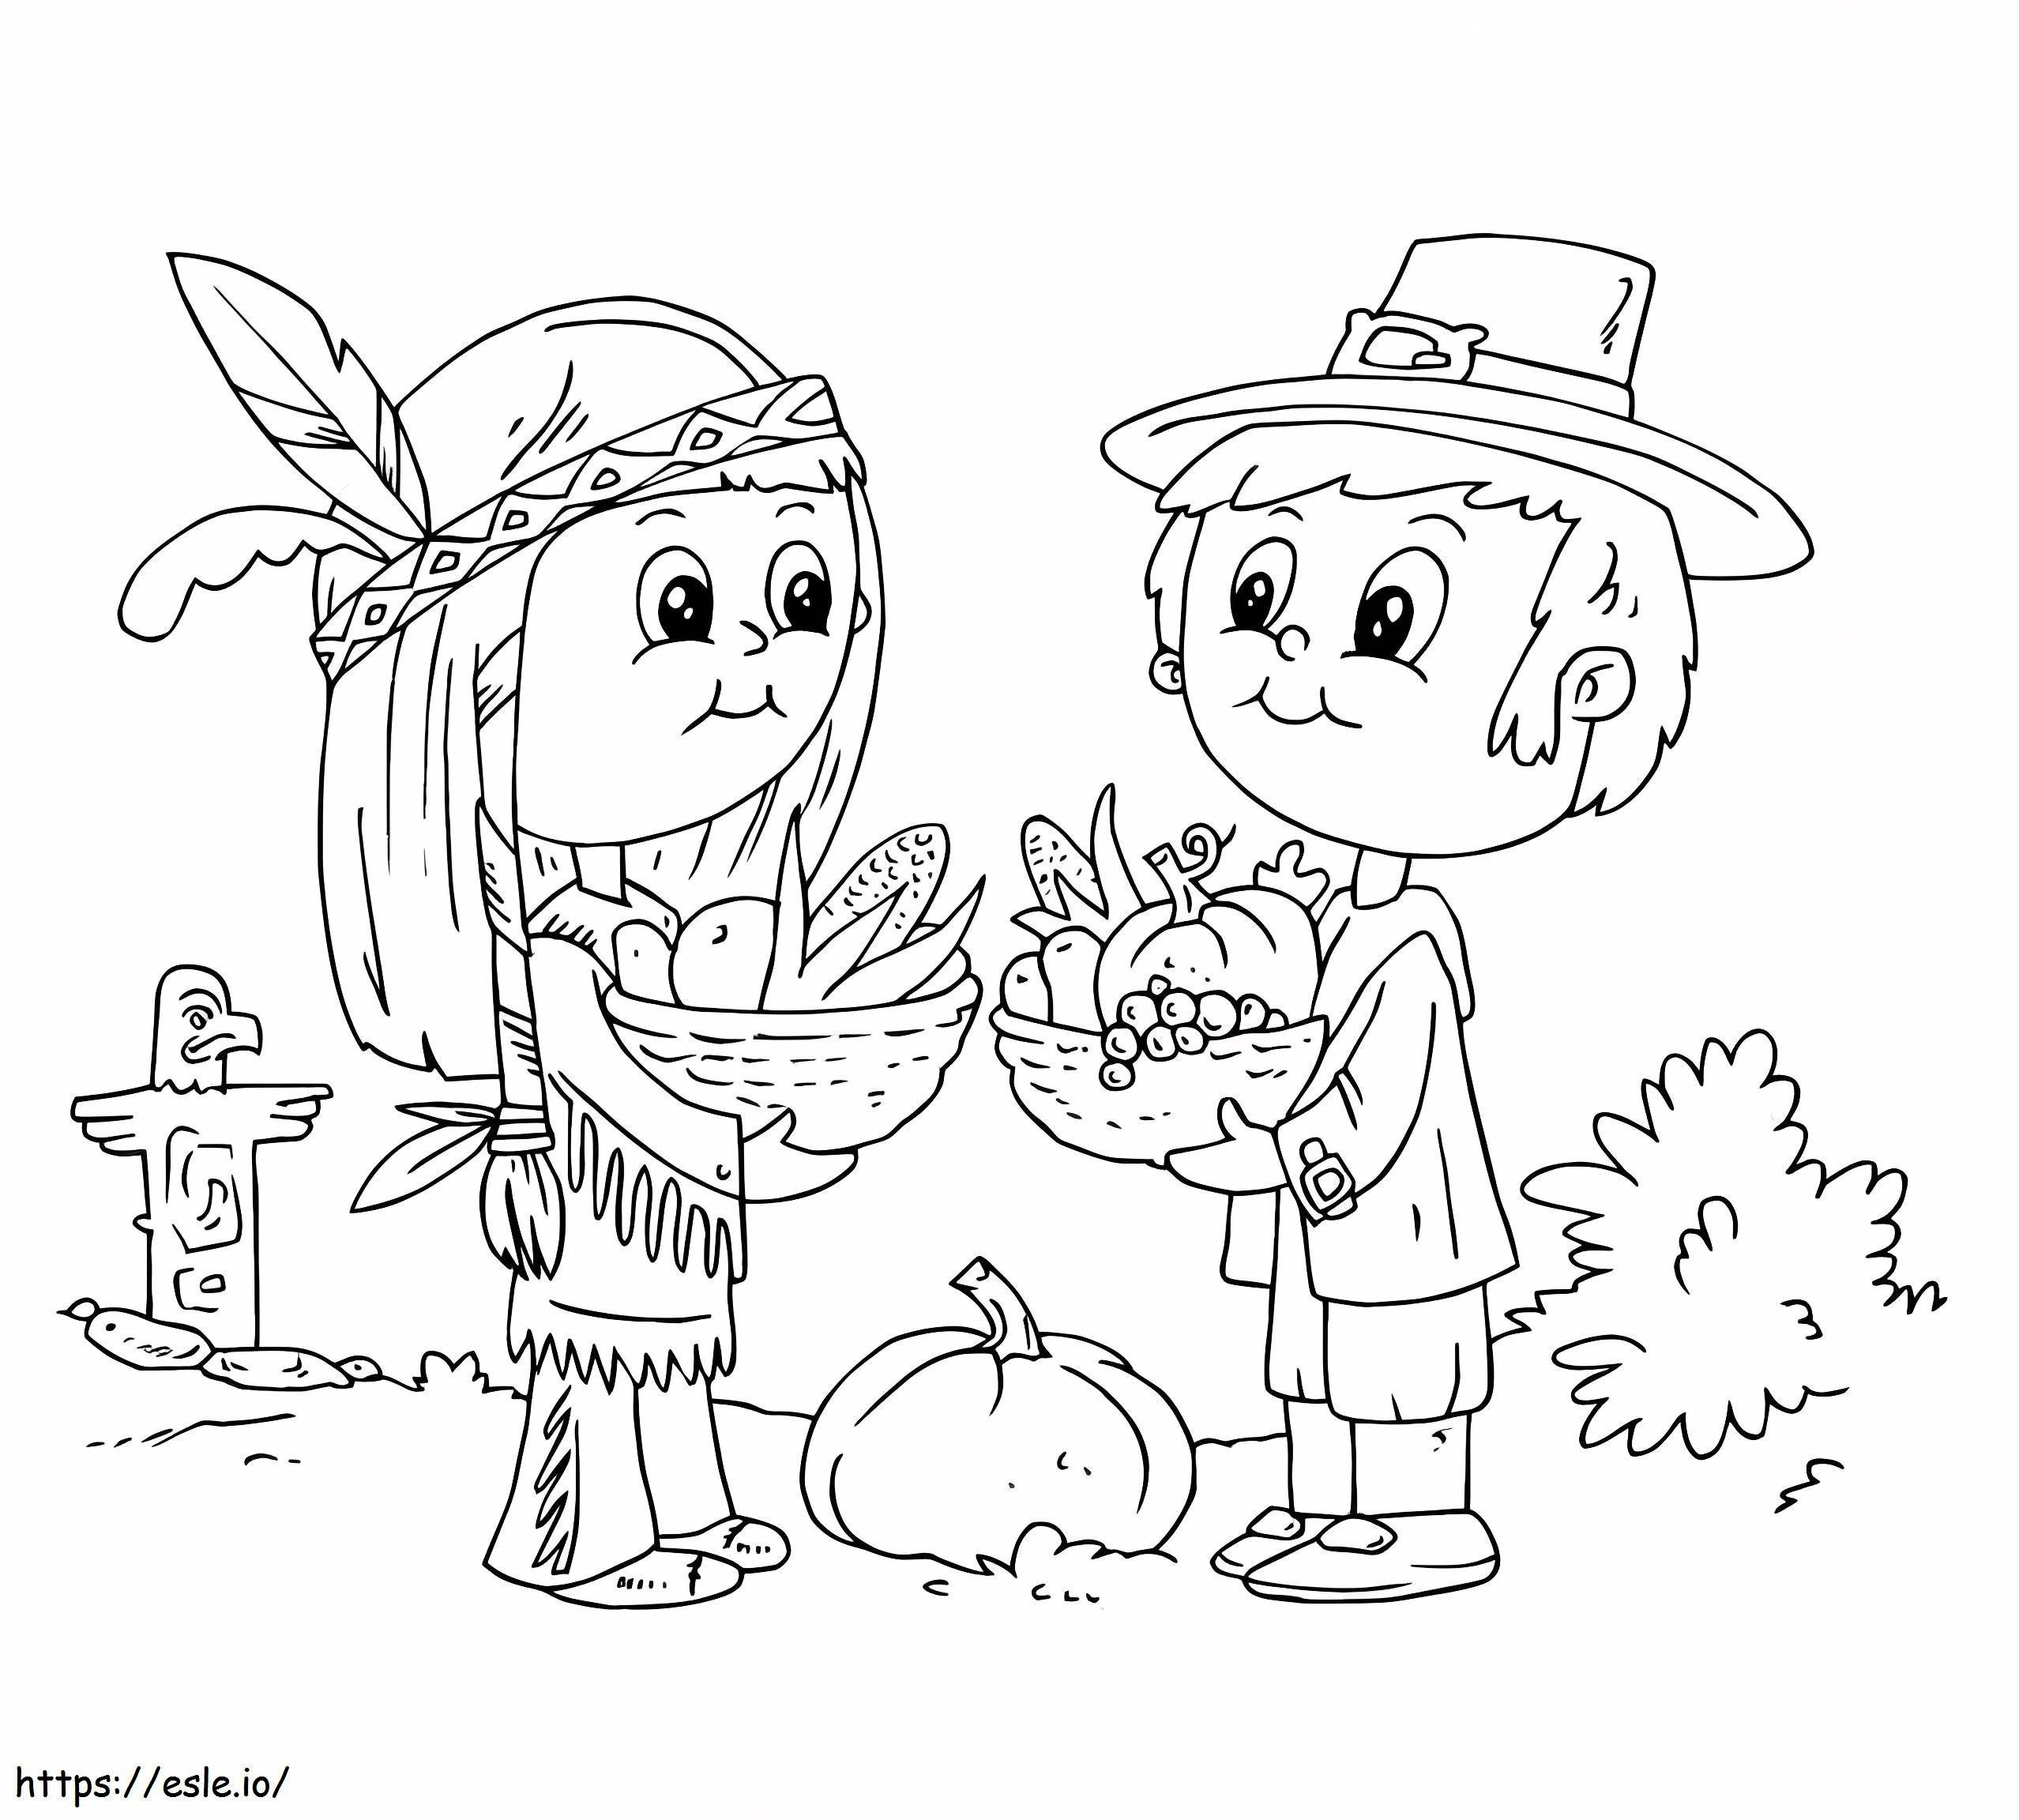 Pilgrim And Indian Children coloring page